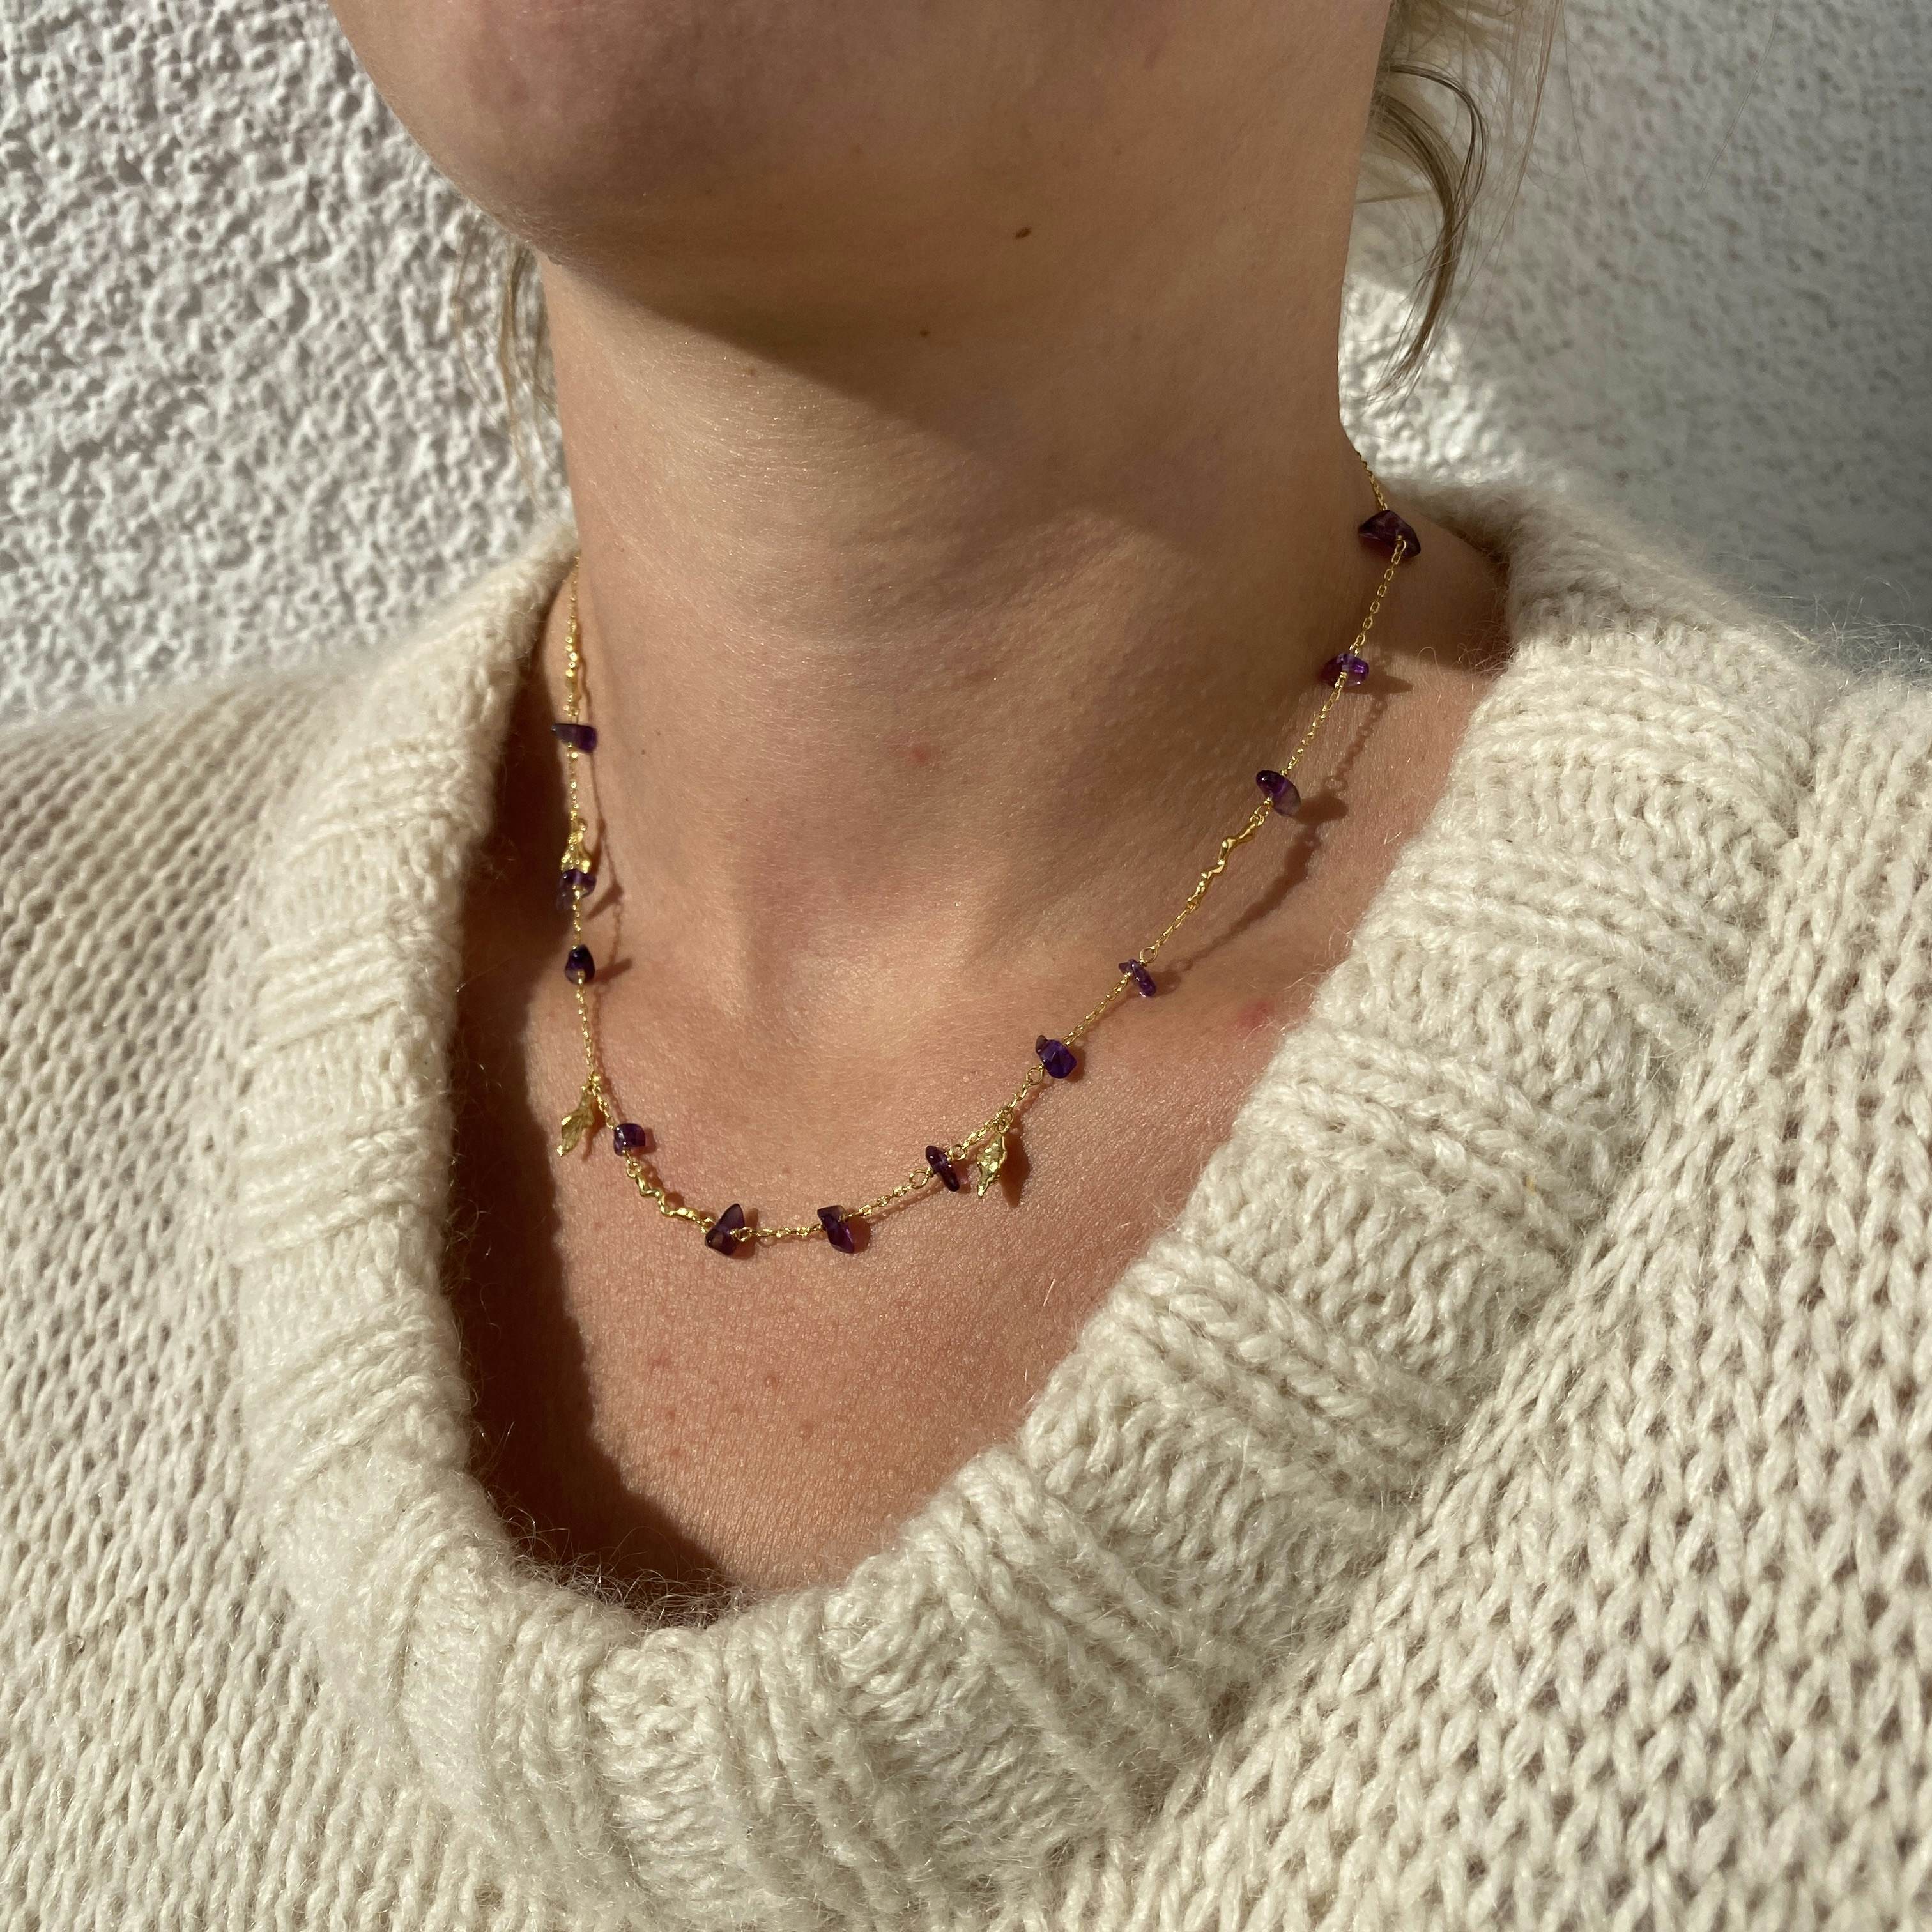 Azzurra Necklace from Maanesten in Goldplated-Silver Sterling 925